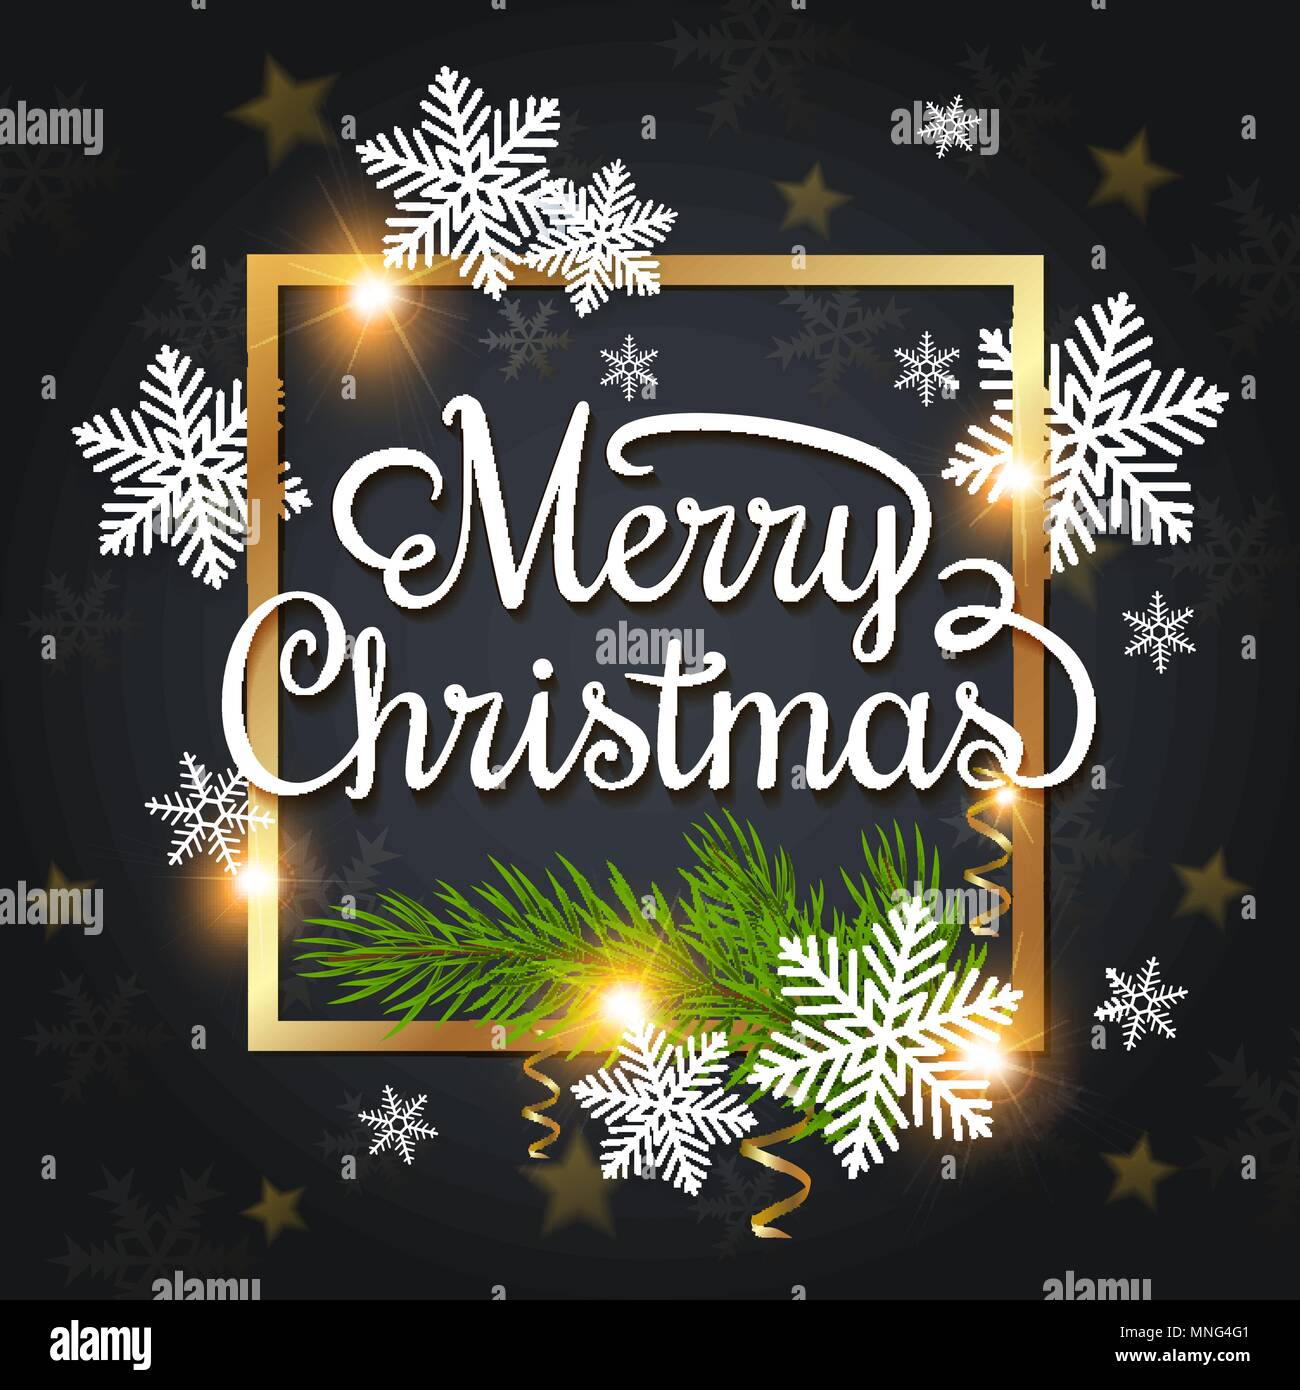 Vector Christmas greeting card. White snowflakes and green fir branch in a golden frame on a black background. Merry Christmas lettering Stock Vector